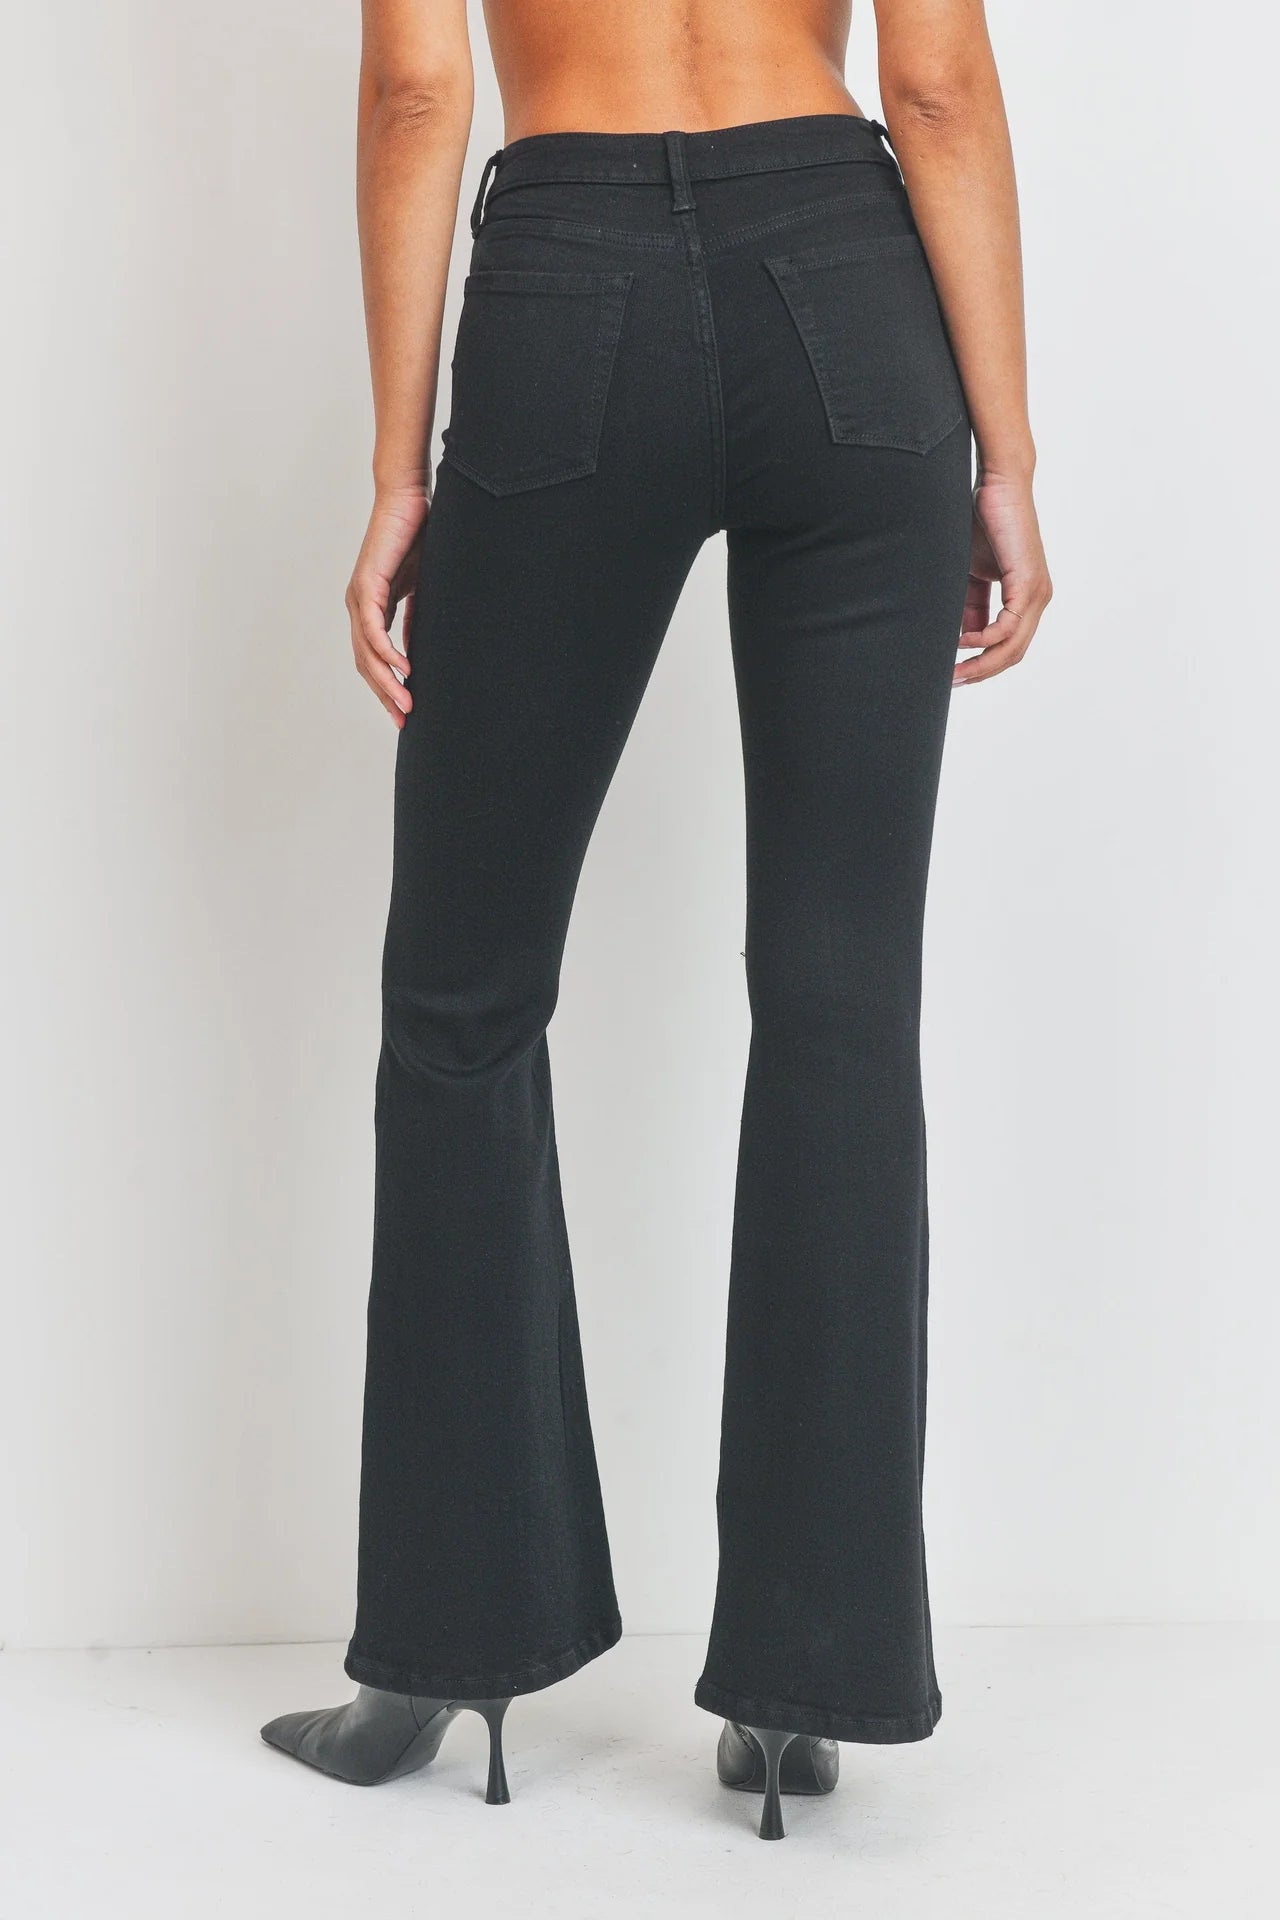 Jeans Pintuck Classy Flare